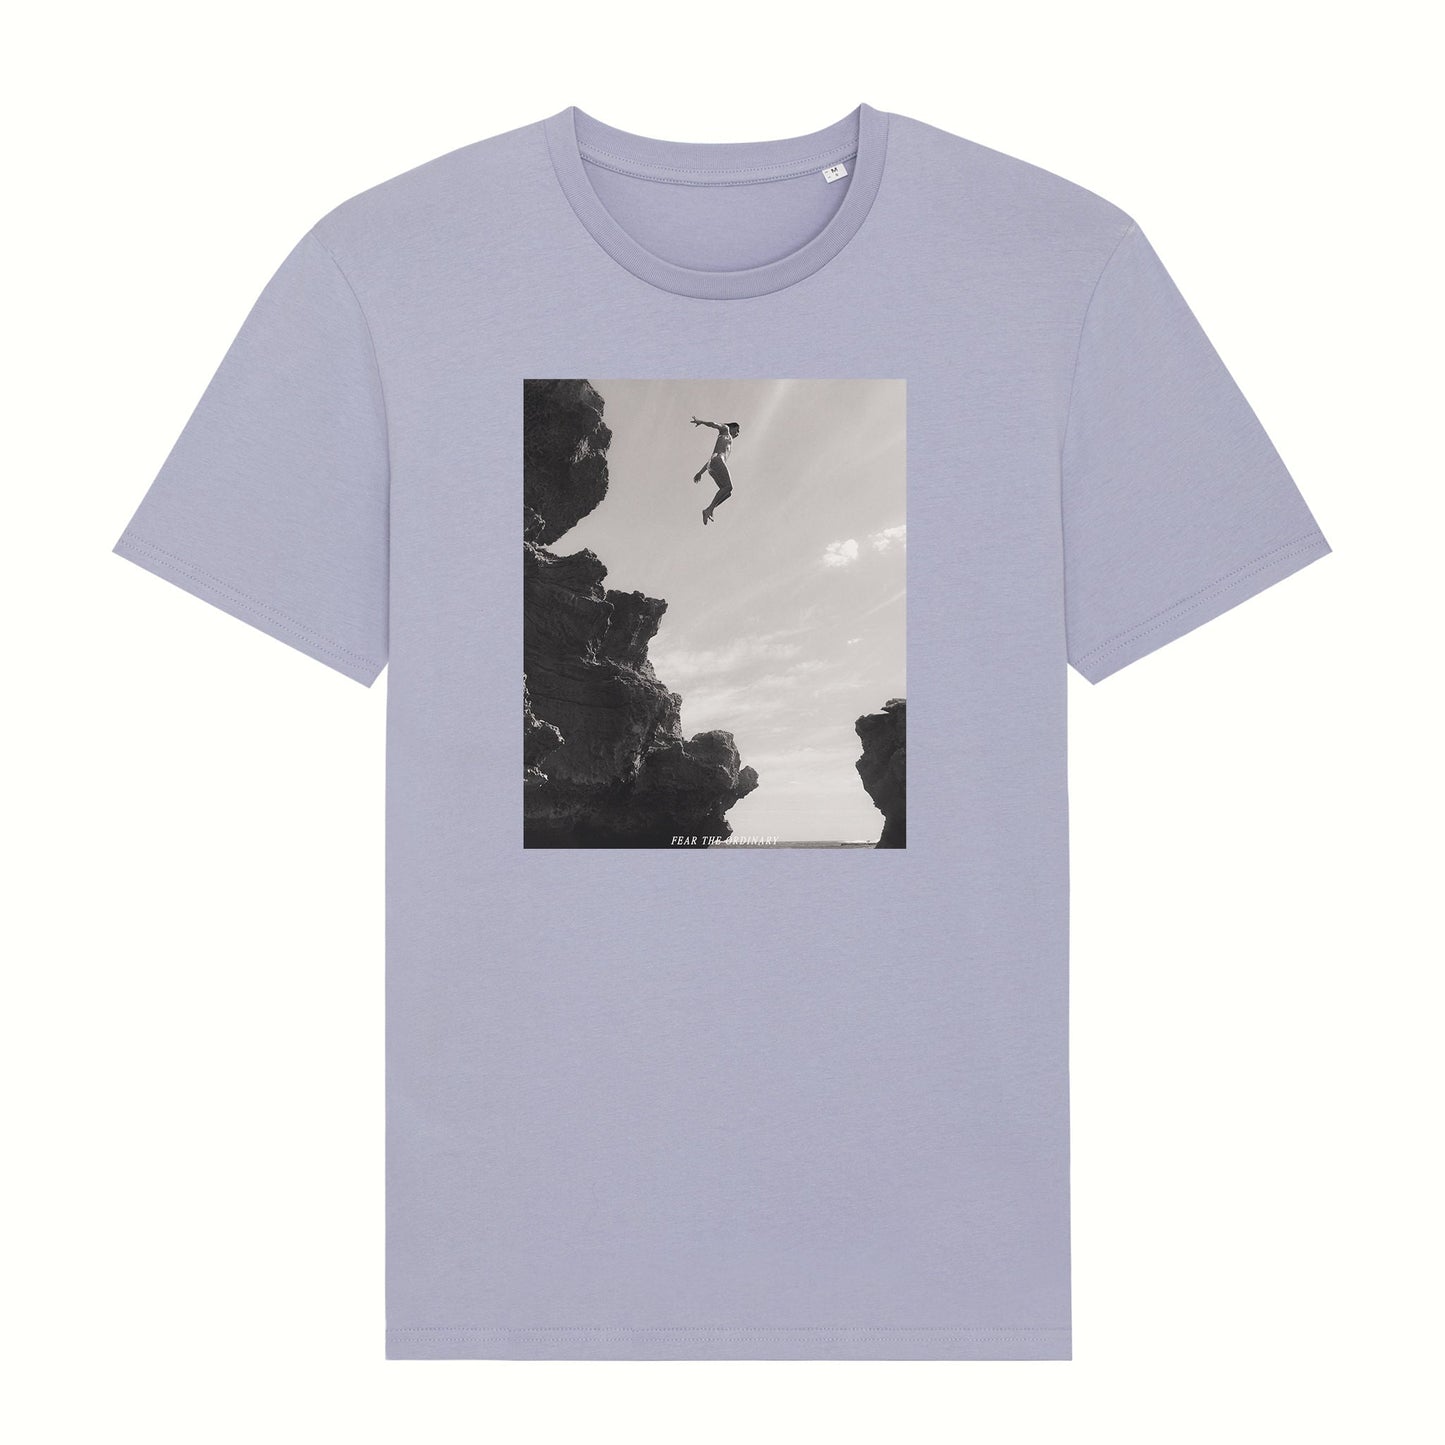 Fear The Ordinary lavender premium organic cotton t-shirt with black and white photo print of a girl jumping from a cliff.